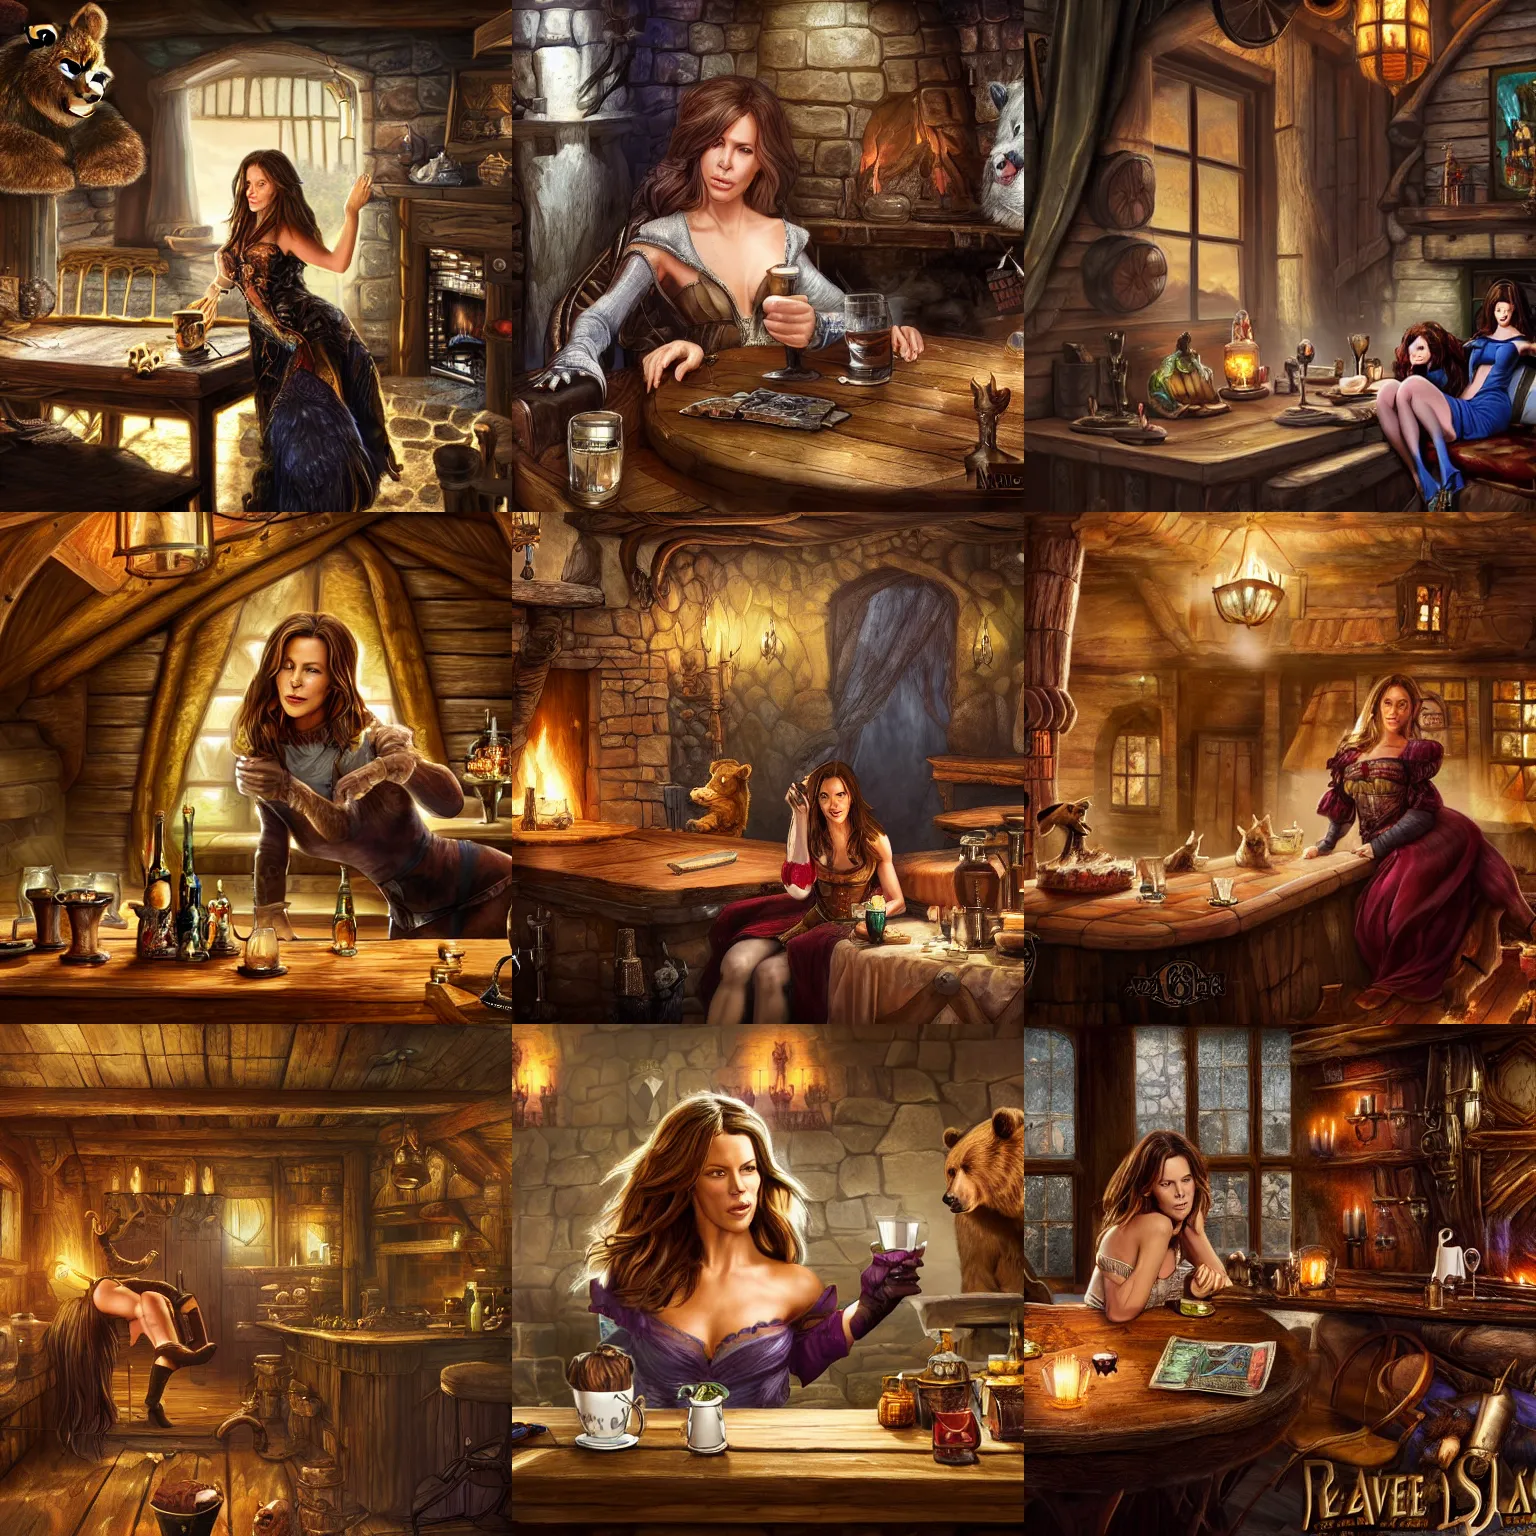 Prompt: kate beckinsale sleep on the table, in fantasy tavern near fireplace, behind bar deck with bear mugs, medieval dnd, colorfull digital fantasy art, 4k